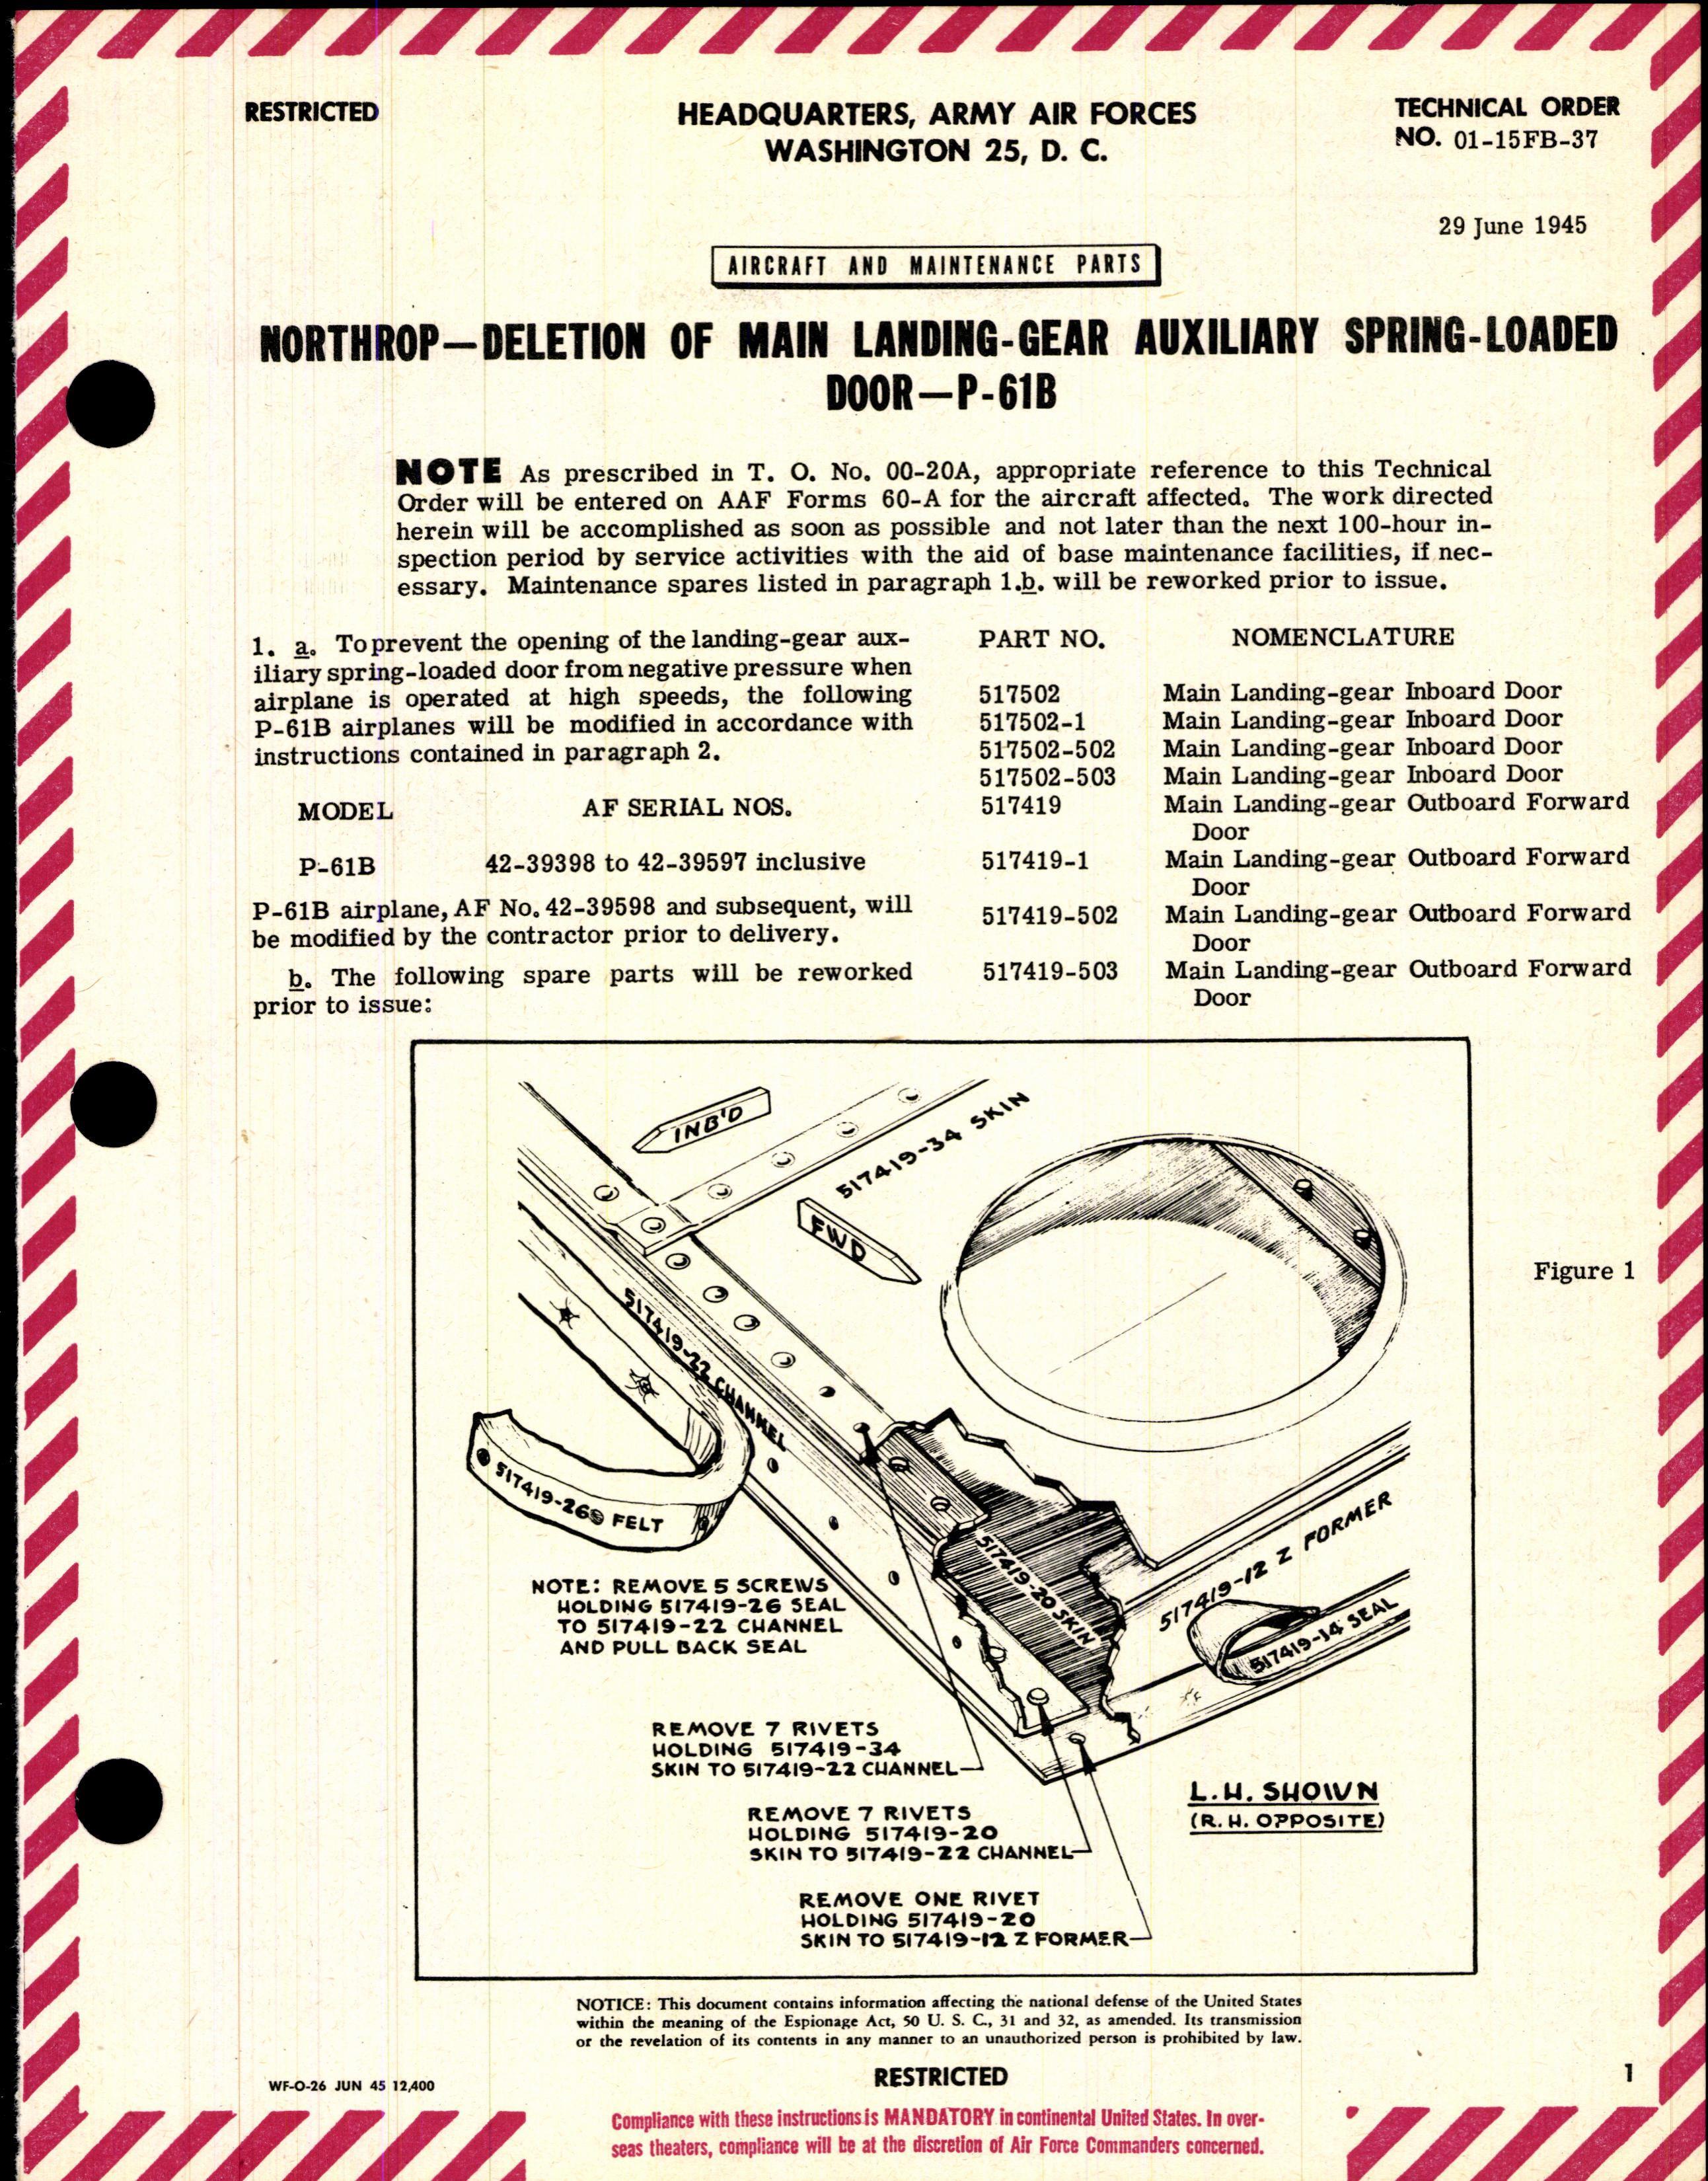 Sample page 1 from AirCorps Library document: Deletion of Main Landing-Gear Auxiliary Spring-Loaded Door for P-61B